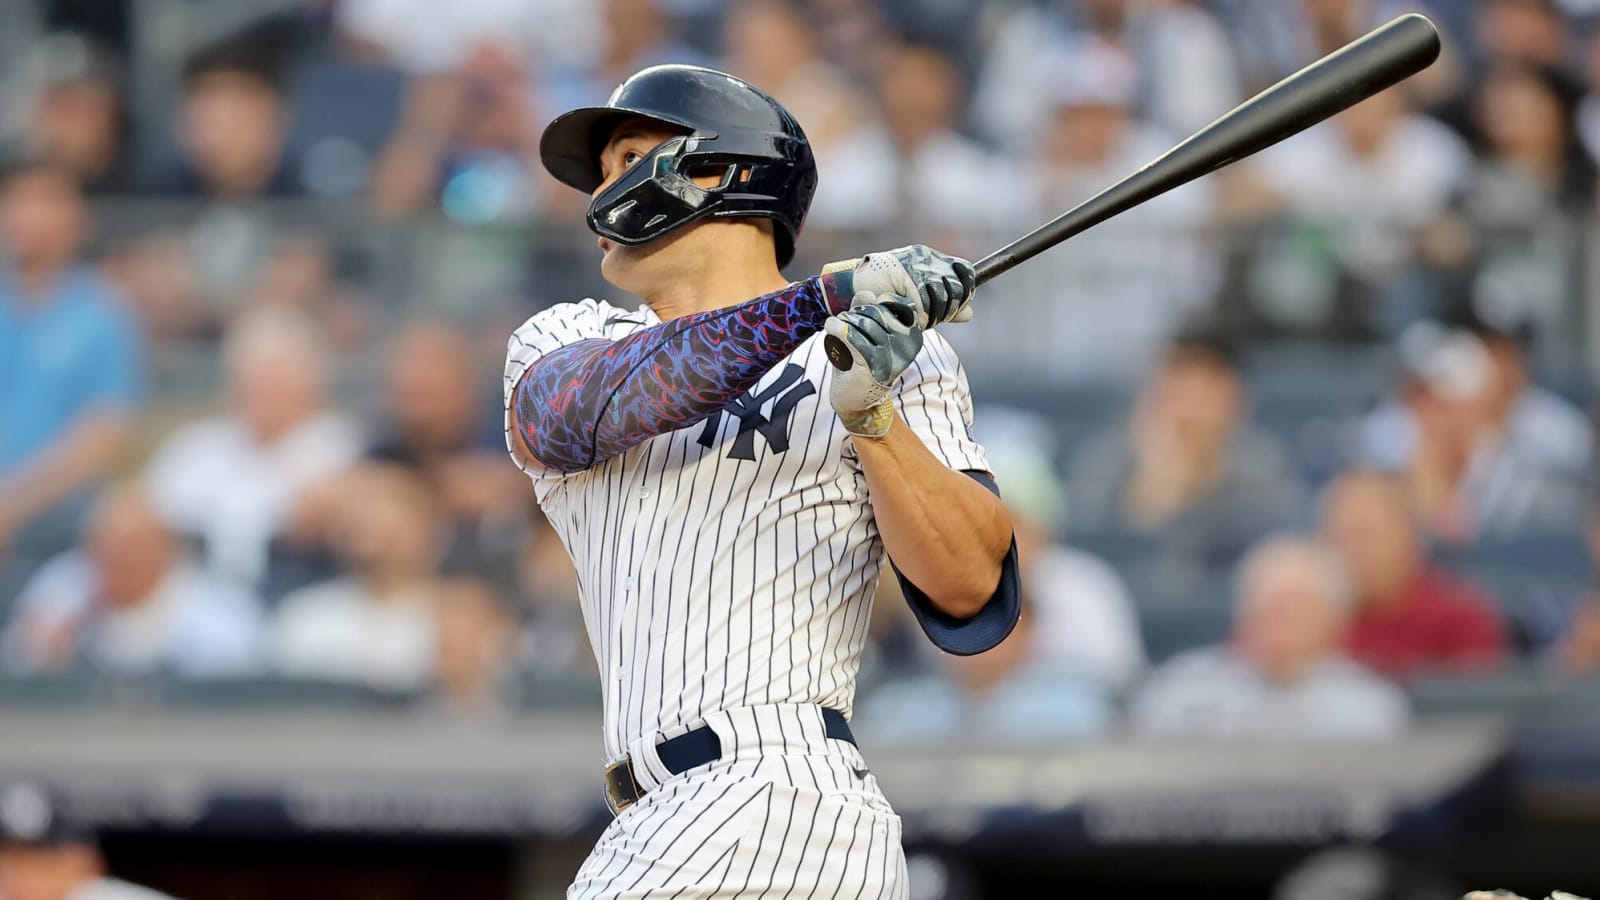 MLB HR props for Monday 8/7: Stanton won't have to hustle when he hits a homer